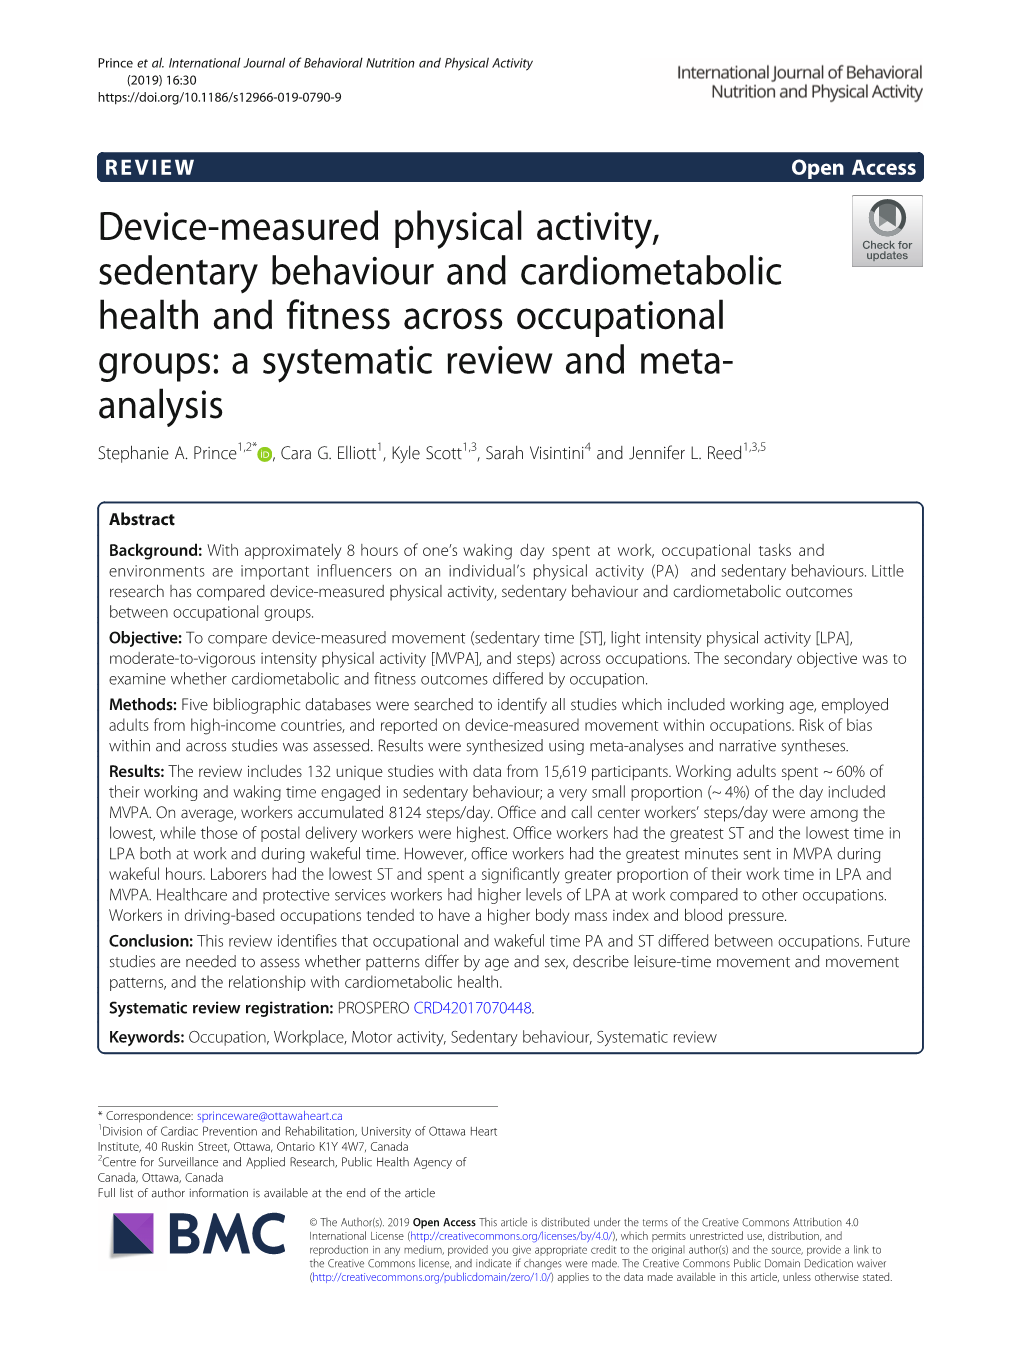 Device-Measured Physical Activity, Sedentary Behaviour and Cardiometabolic Health and Fitness Across Occupational Groups